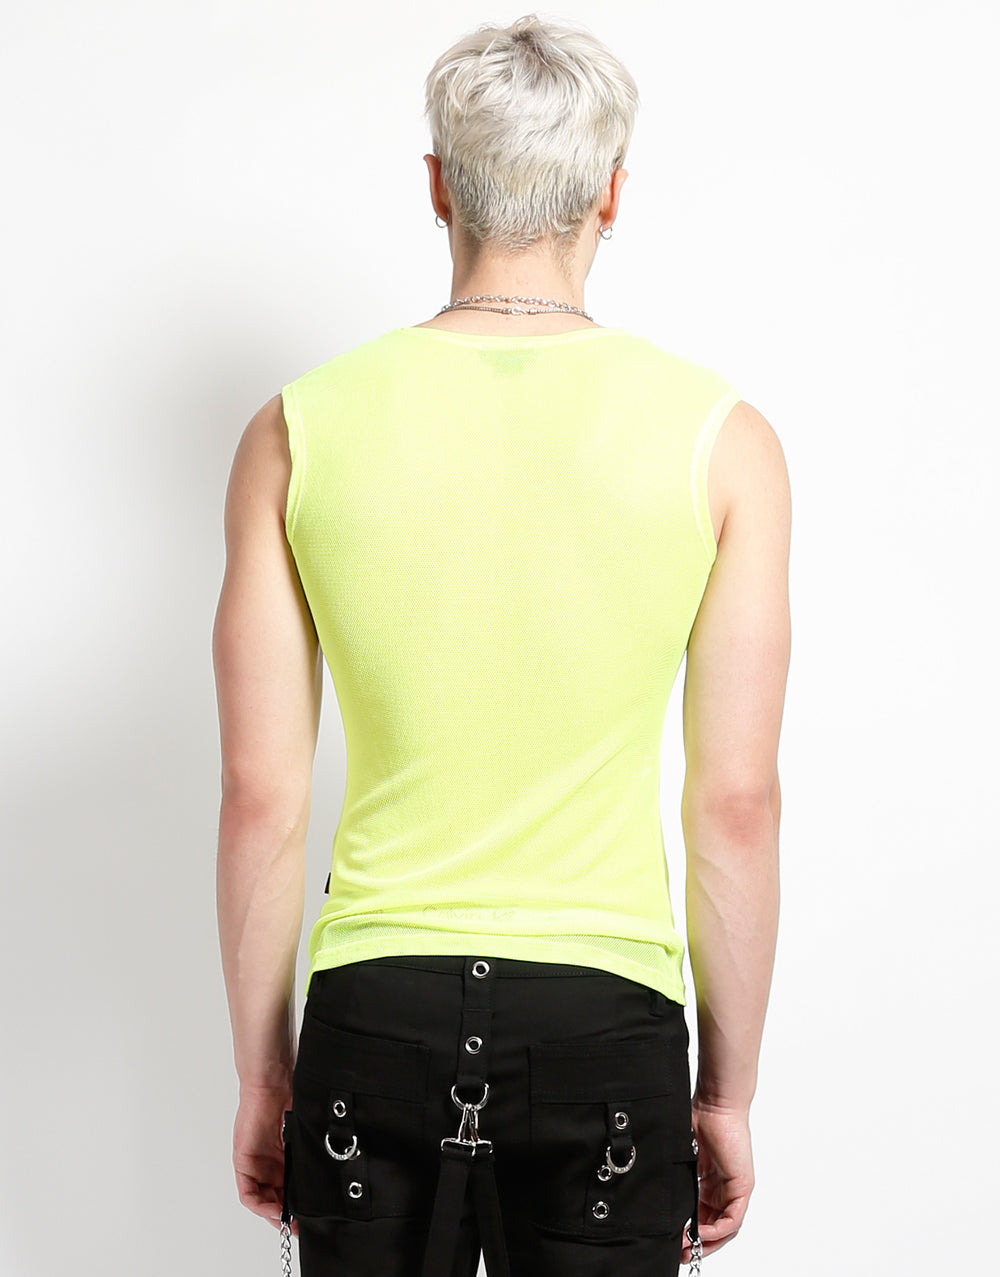 MUSCLE TANK FISHNET LIME